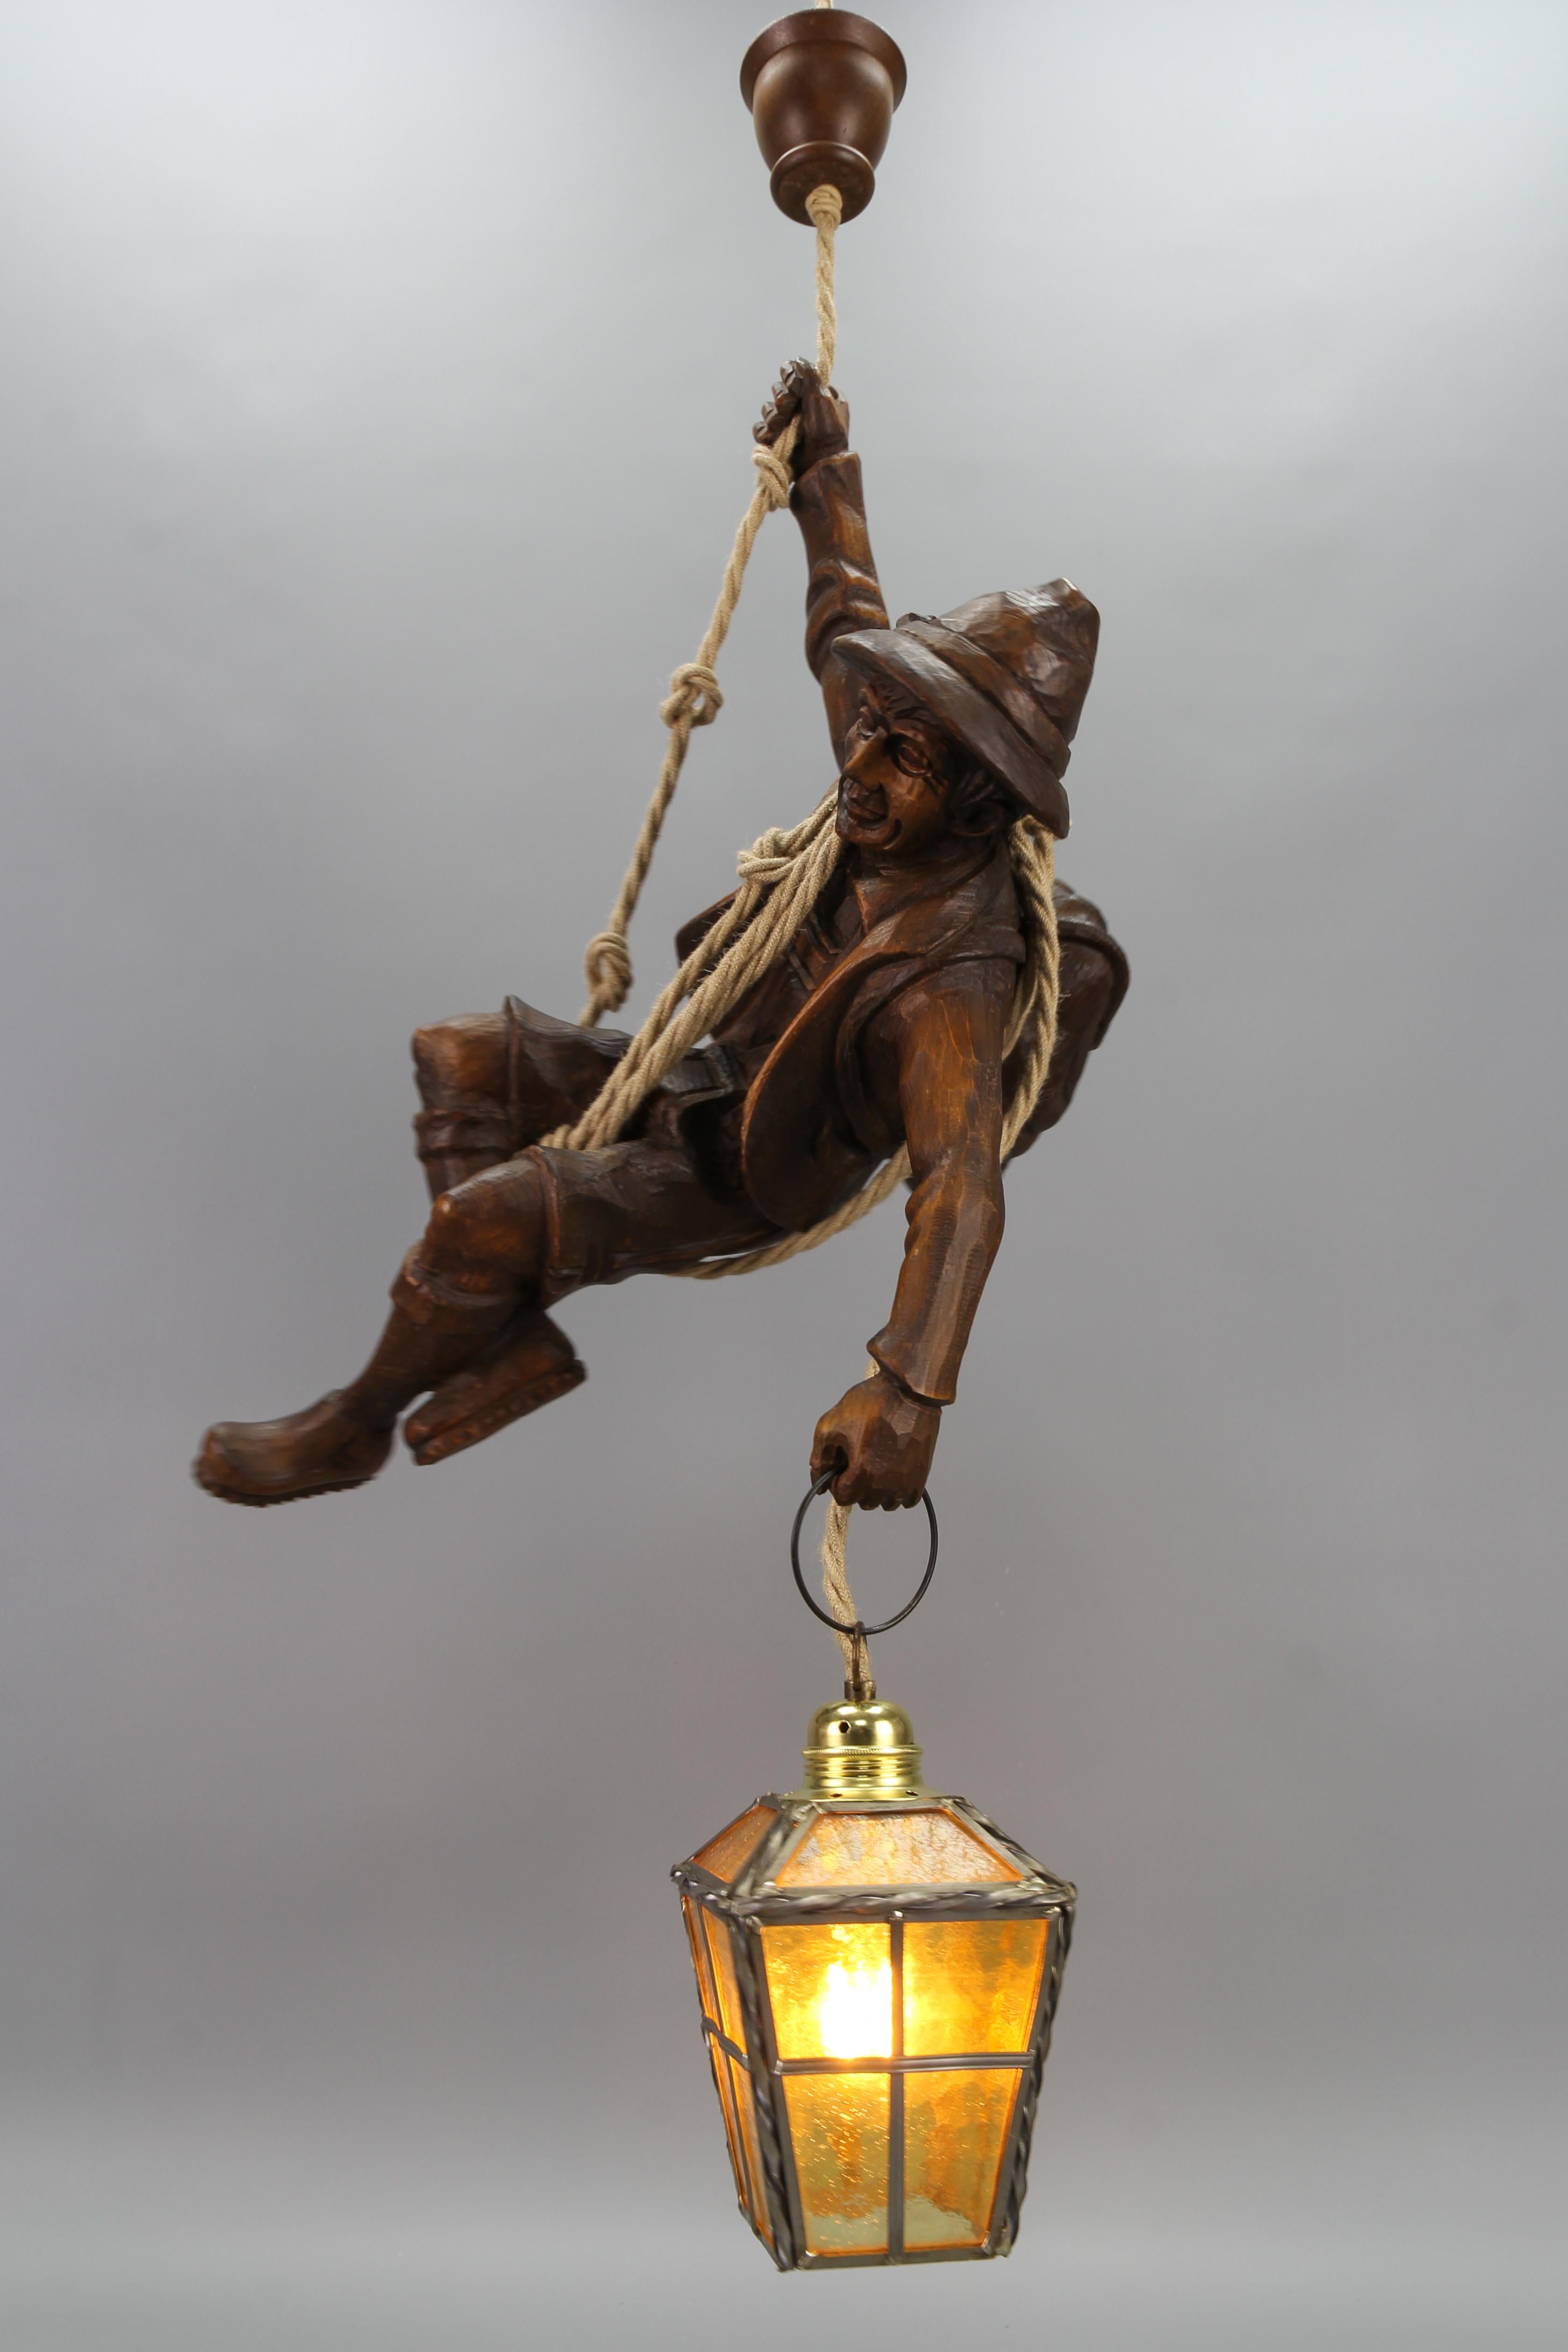 Large Pendant Light Fixture with Carved Climber Figure and Lantern, Germany
This impressive German figural pendant lamp features a masterfully hand-carved linden wood figure of a handsome mountain climber in natural brown wood tones. The detailed